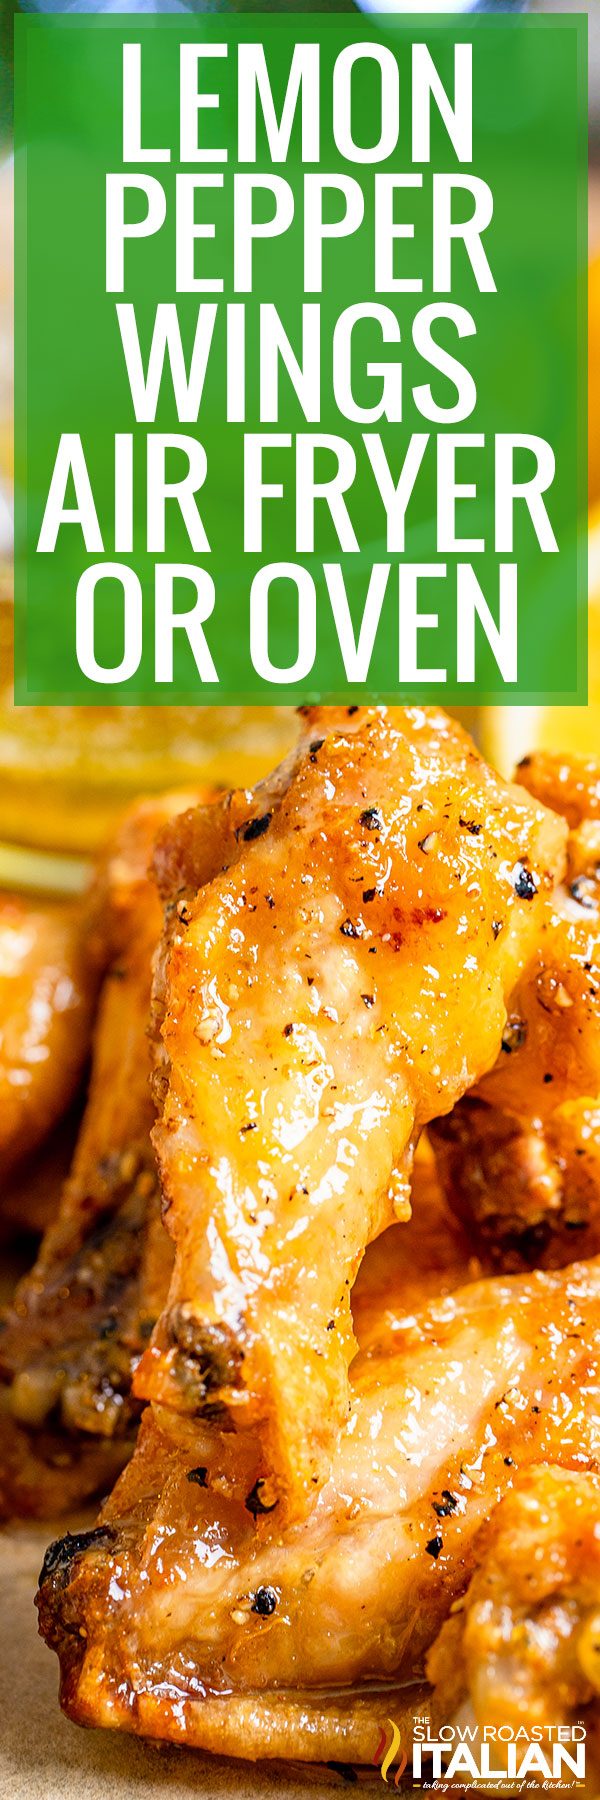 titled image (and shown): Lemon Pepper Wings (Air Fryer or Oven)